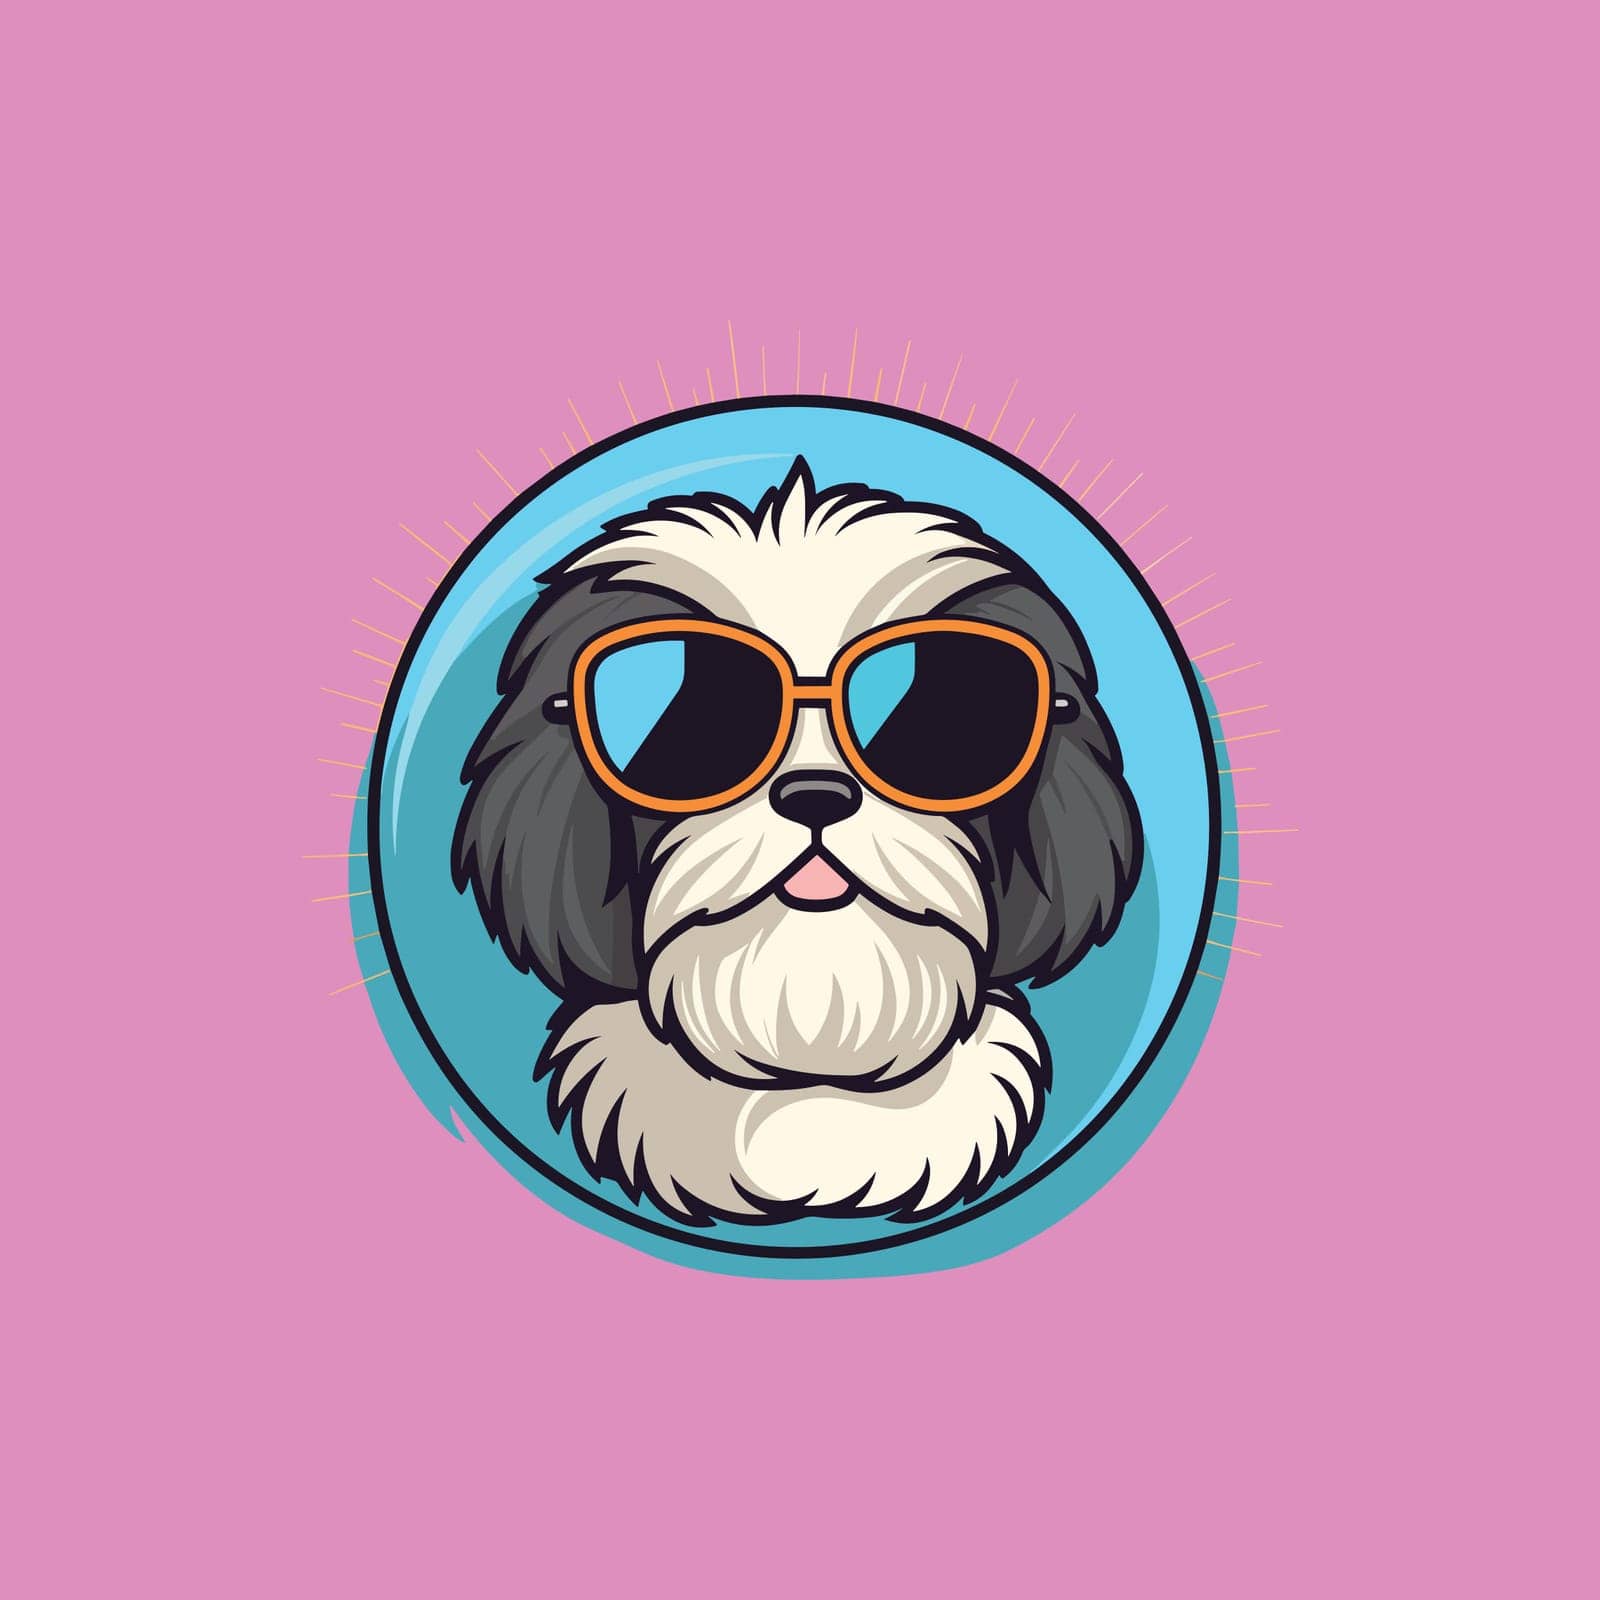 Funky dog wearing sunglasses on pink by Vinhsino